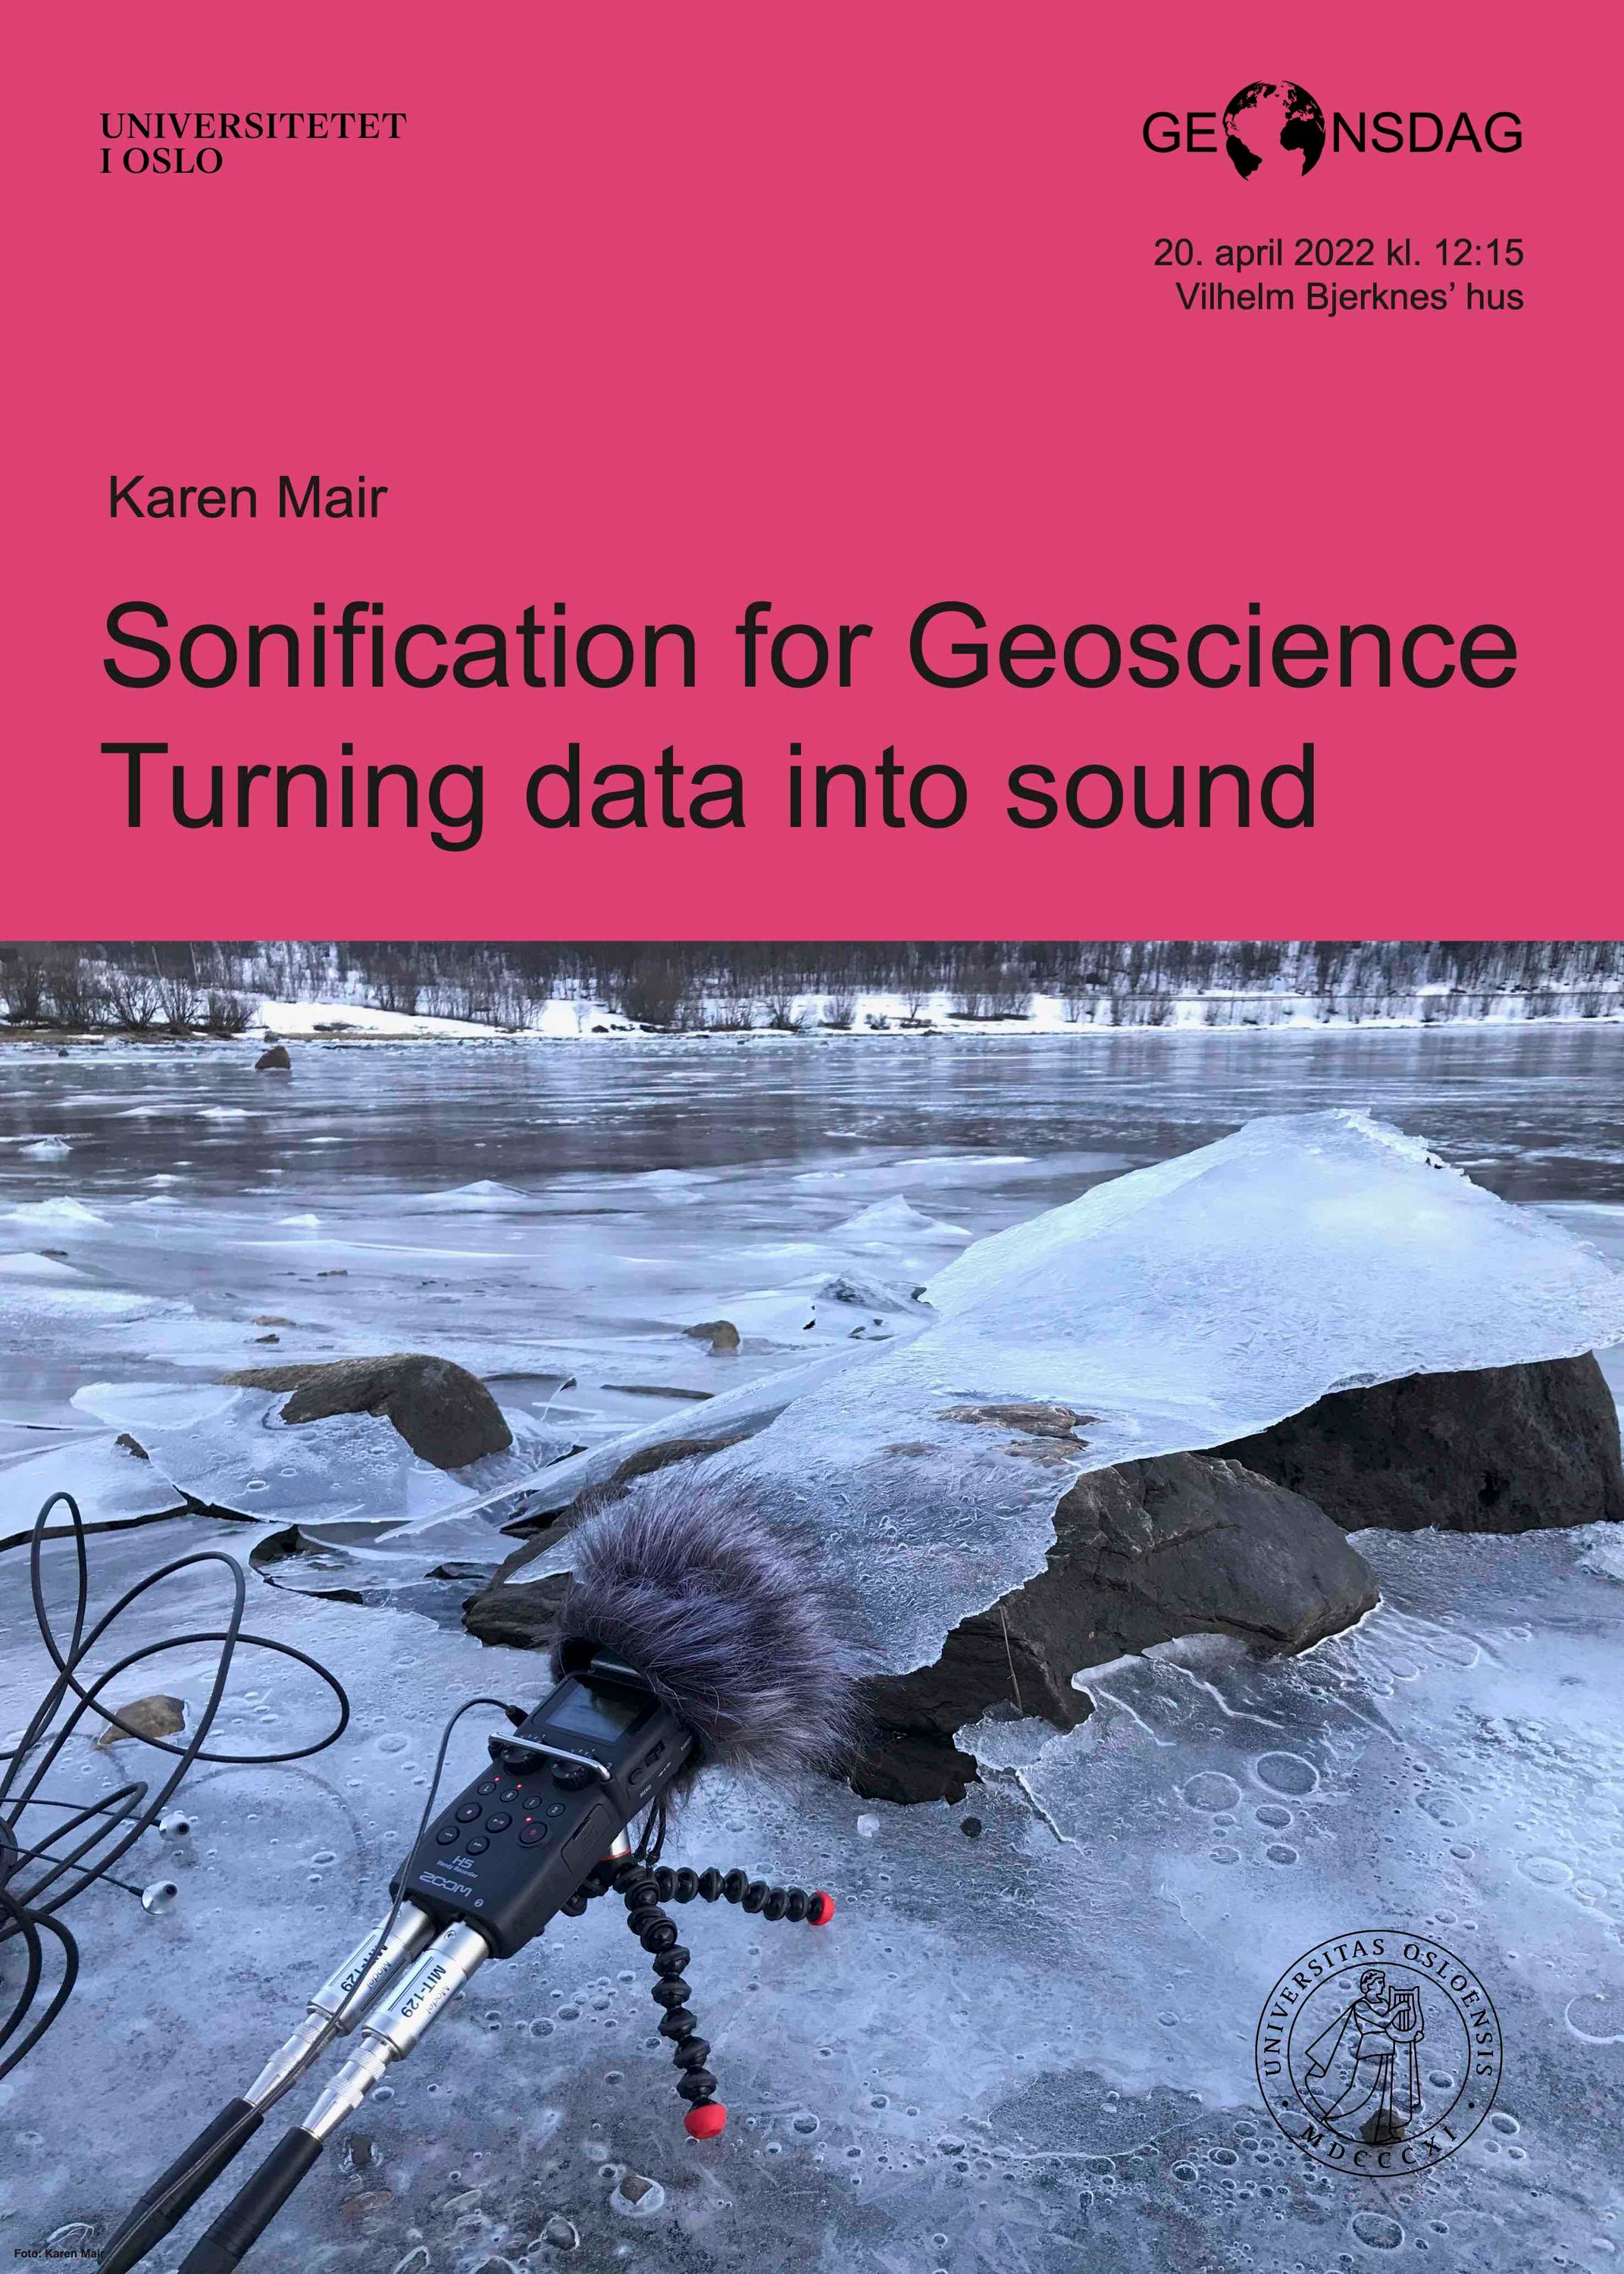 Sonification for geoscience